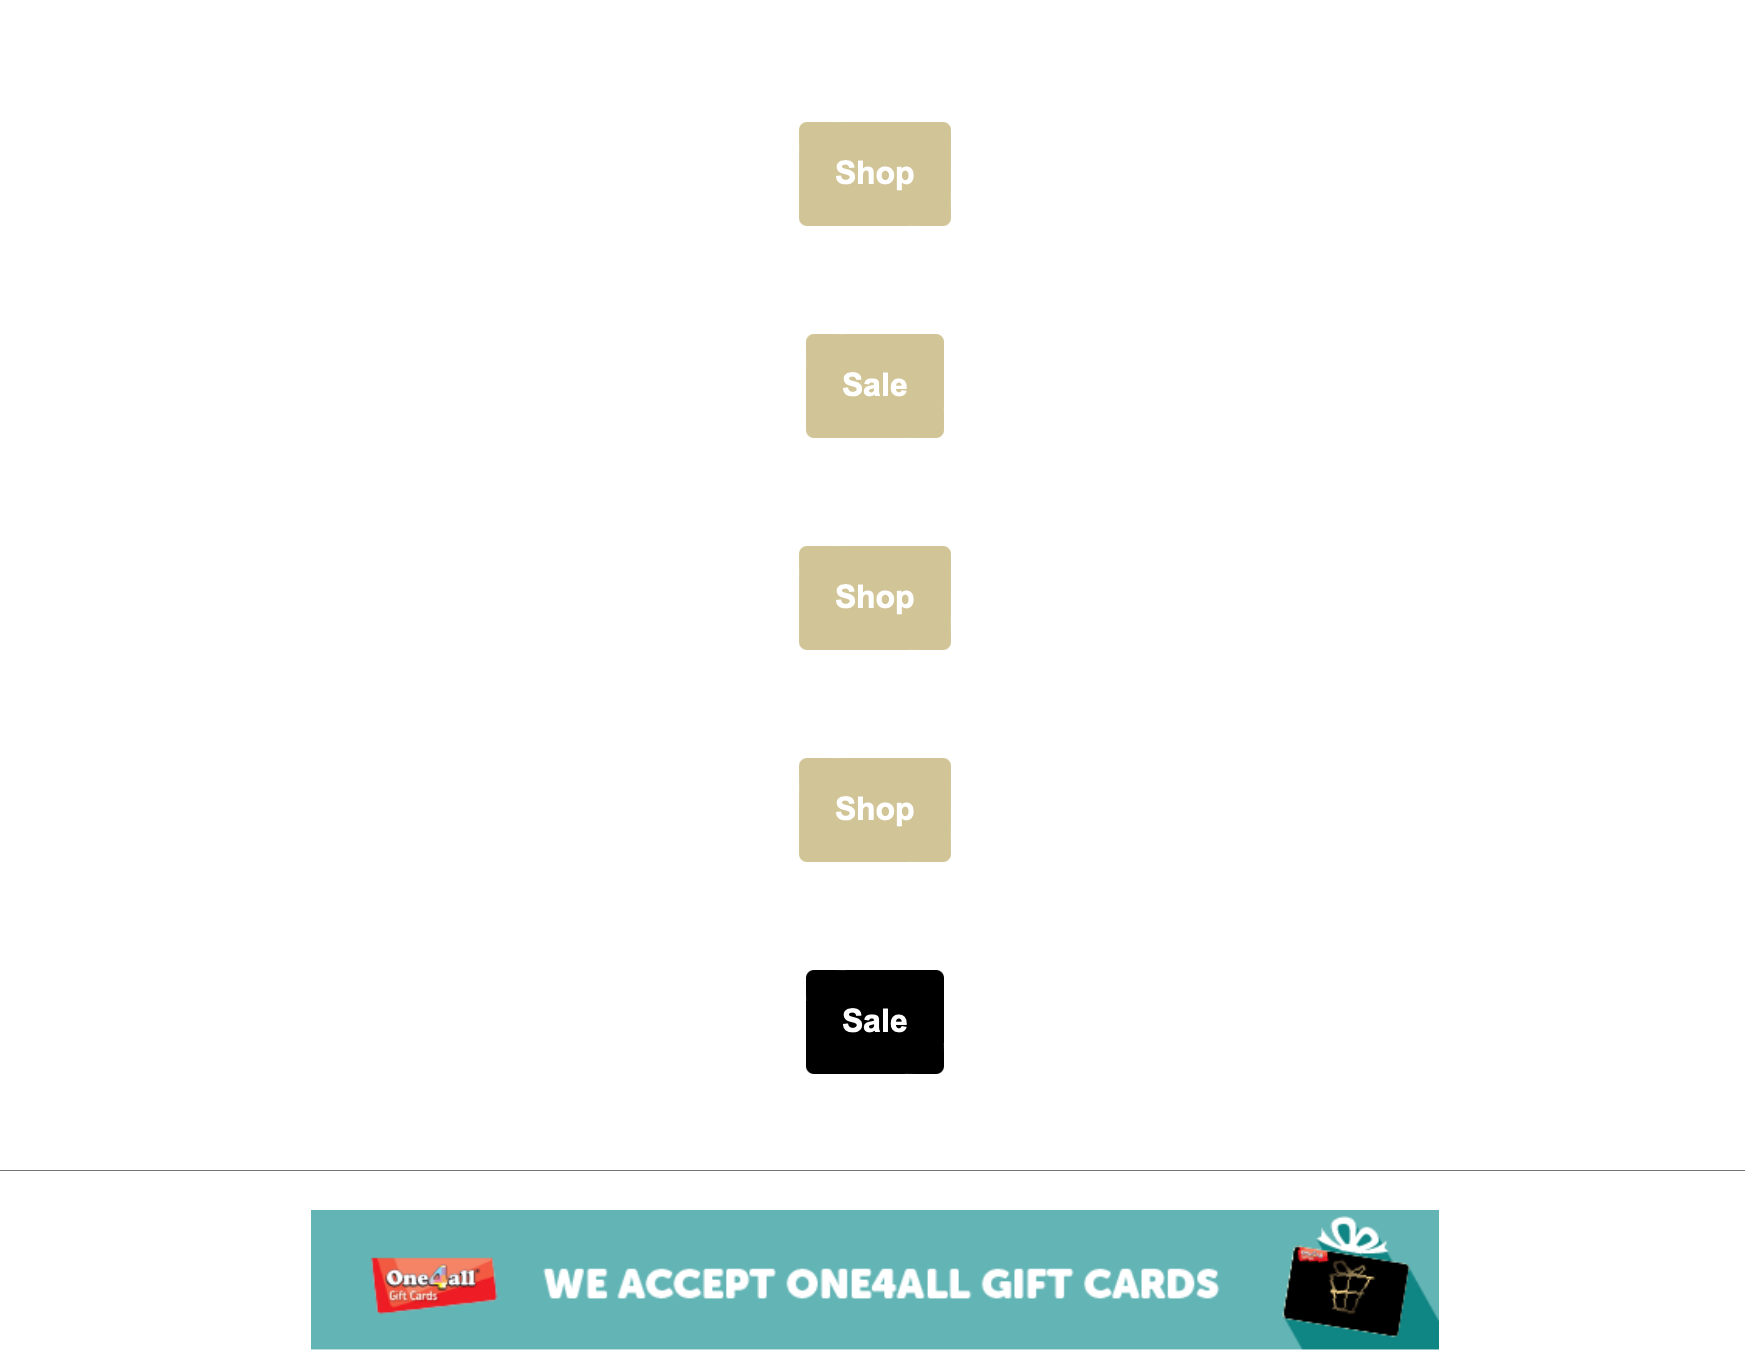 A column of links styled as buttons saying: Shop, Sale, Shop, Shop, Sale, with an ad underneath